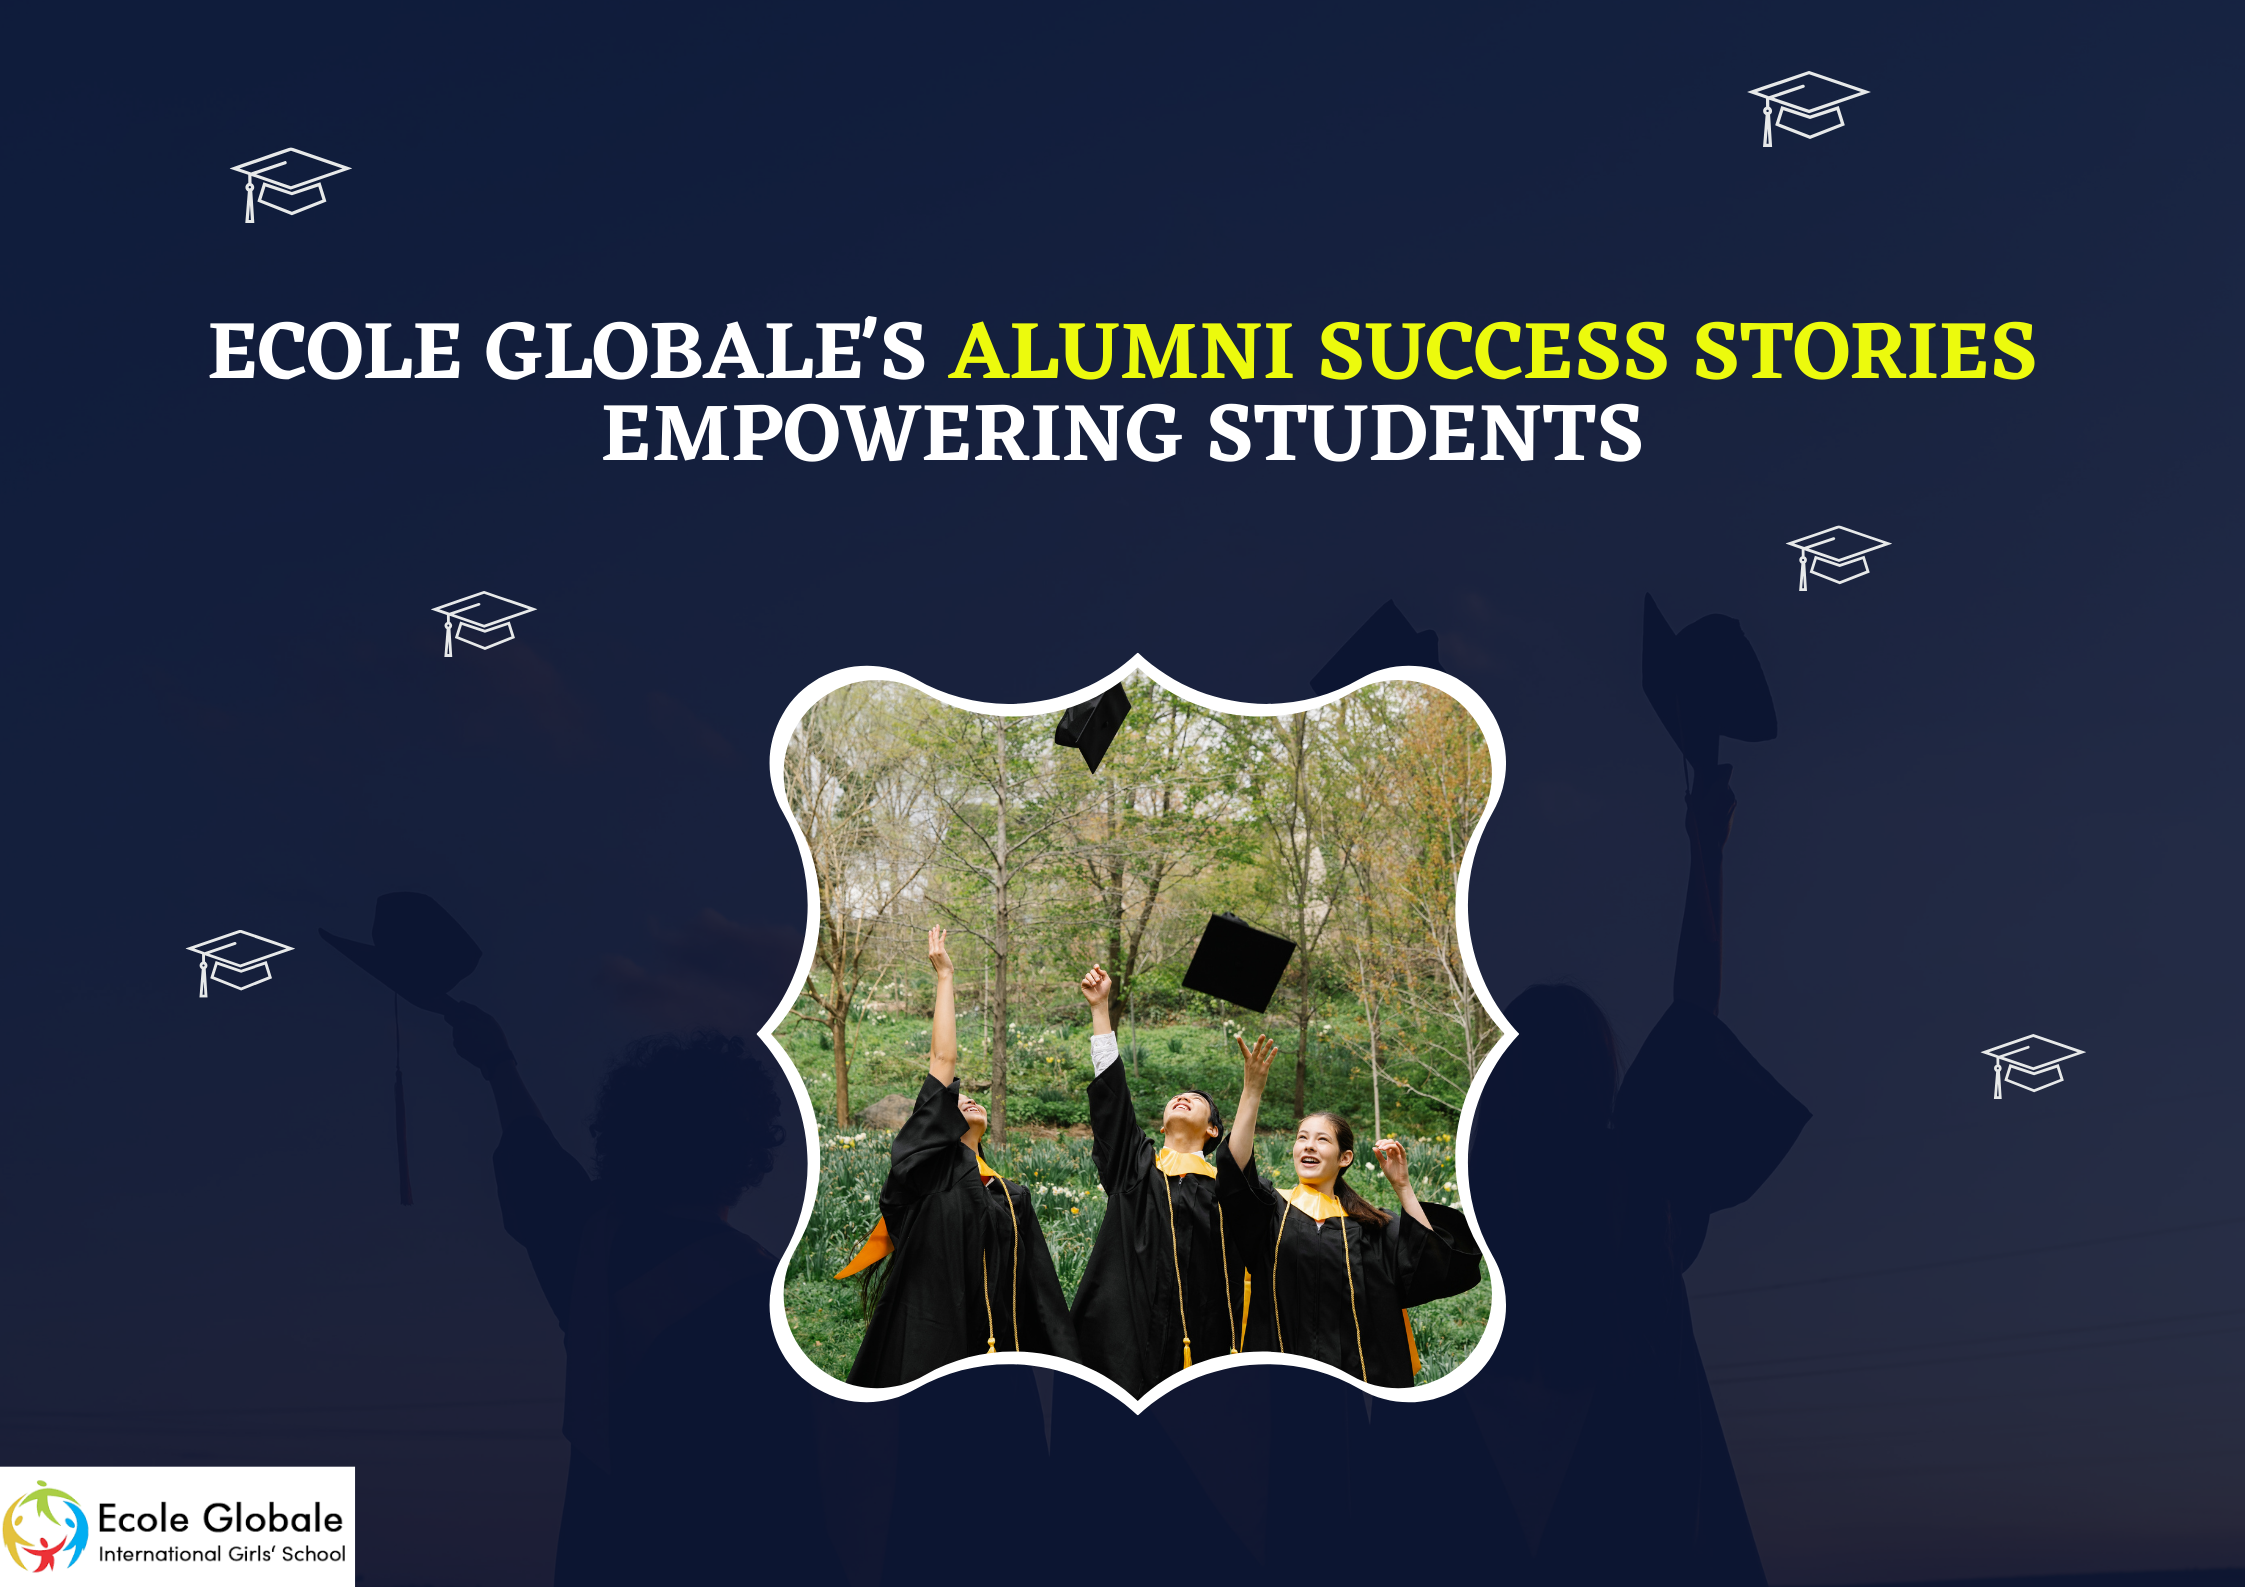 You are currently viewing Ecole Globale’s Alumni Success Stories Empowering Students